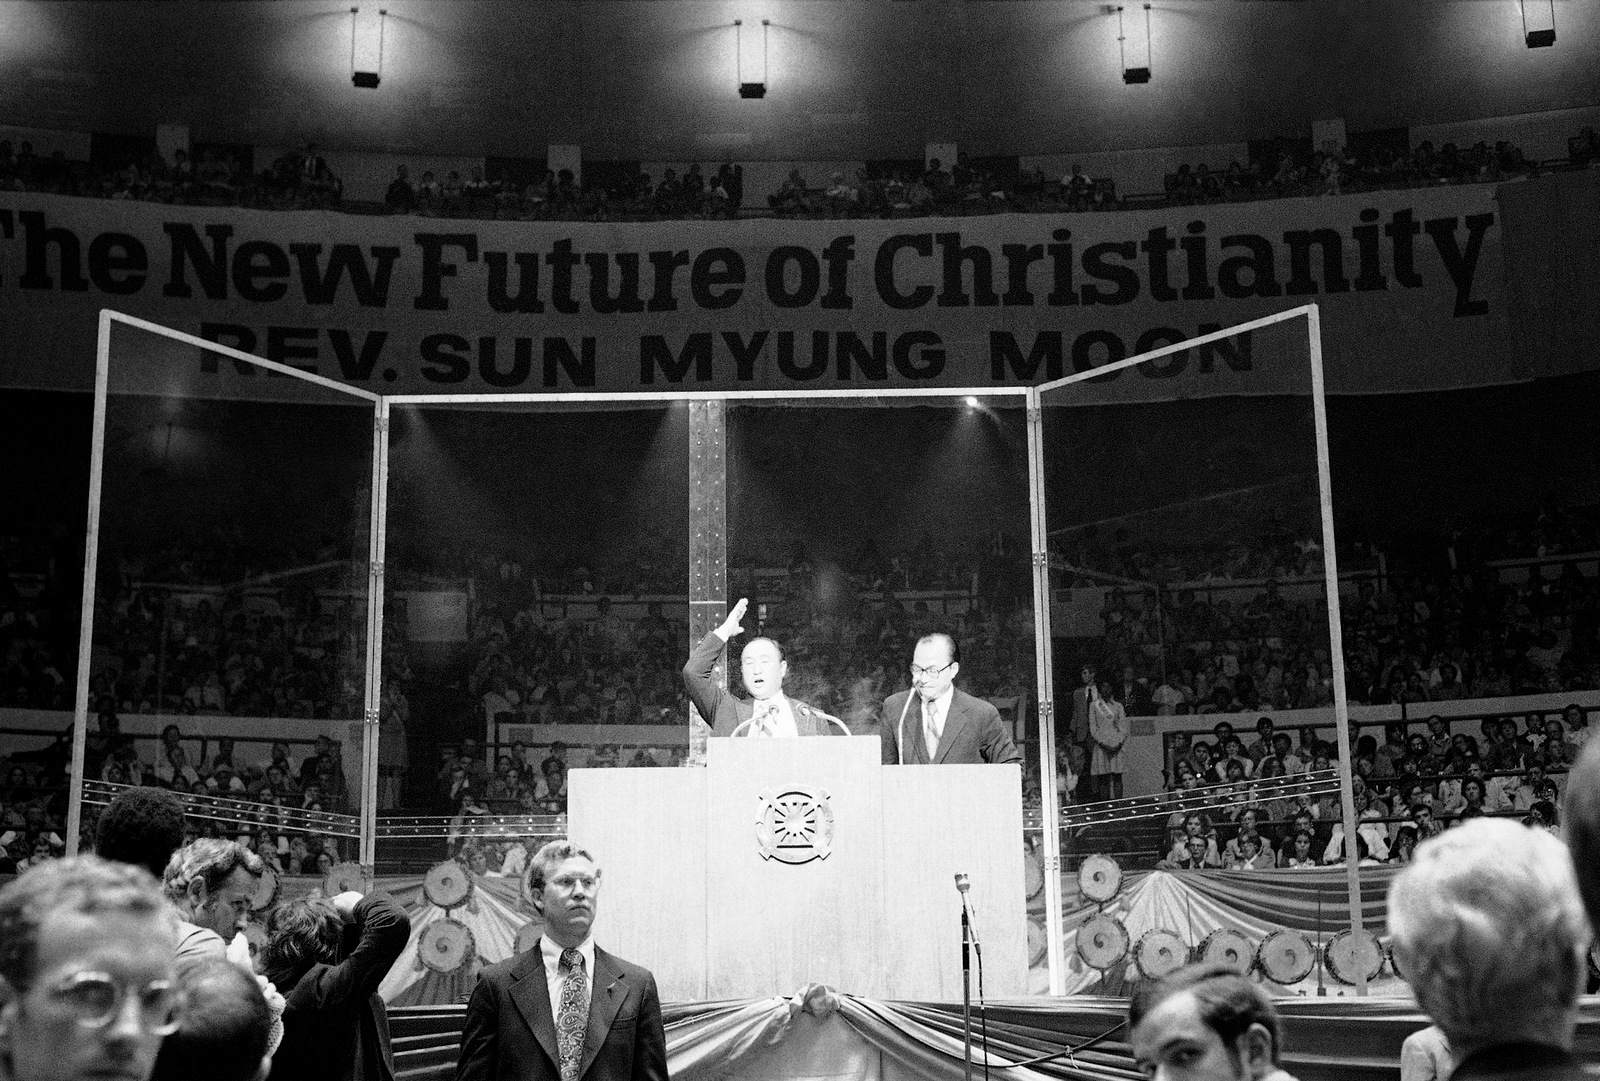 The Rev. Sun Myung Moon preaches to a capacity crowd of 20,000 on Sept. 18, 1974 in New York’s Madison Square Garden. The elaborately promoted Korean Evangelist proclaims a “New Truth” in which Jesus will come again as the third Adam and will take a bride. (AP/RP)